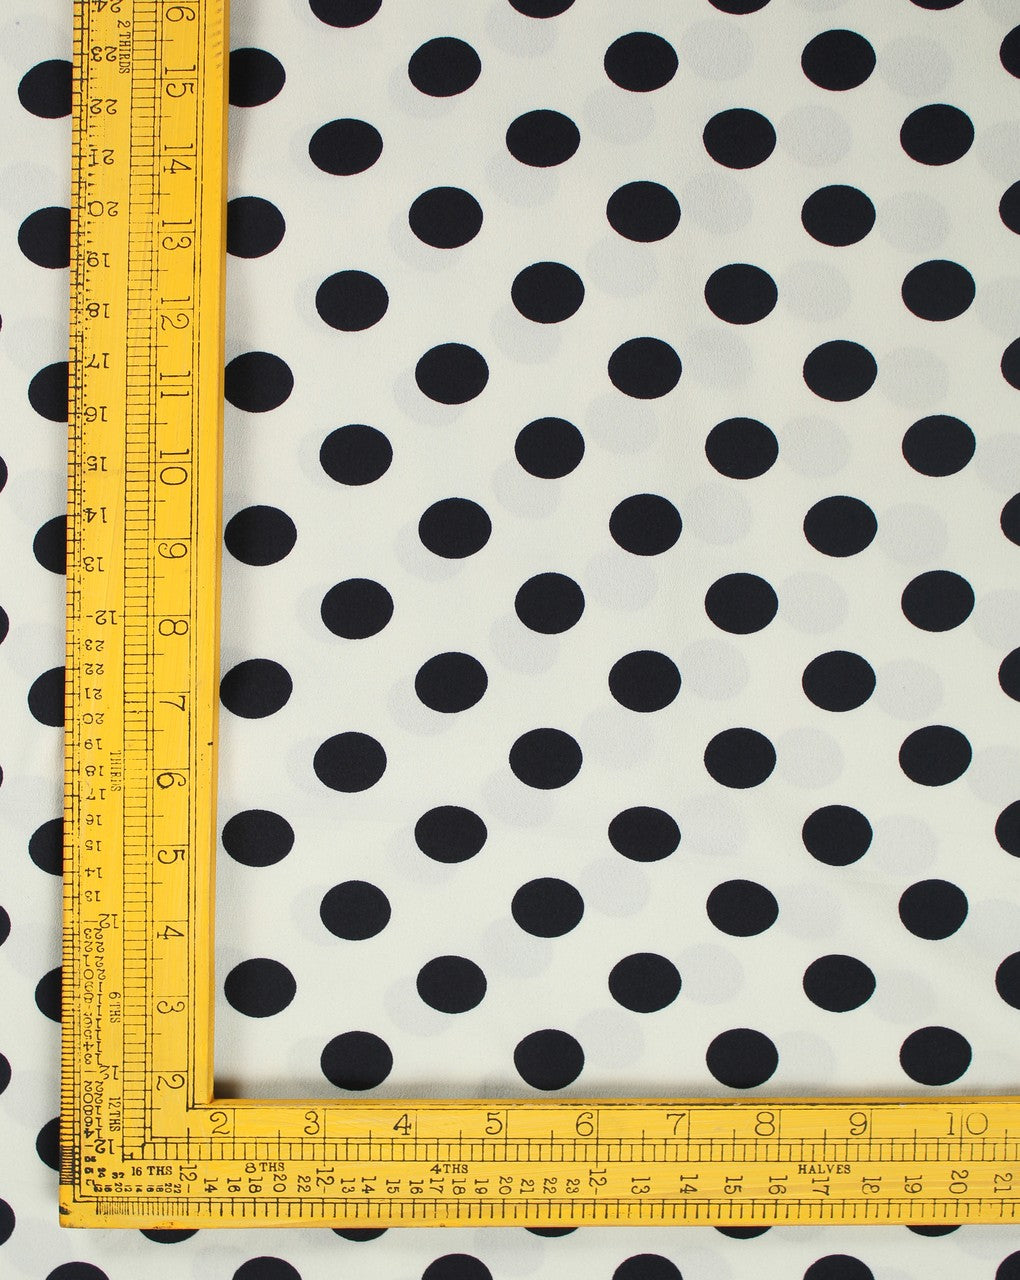 White And Navy Blue Polka Dots Design Polyester Crepe Fabric